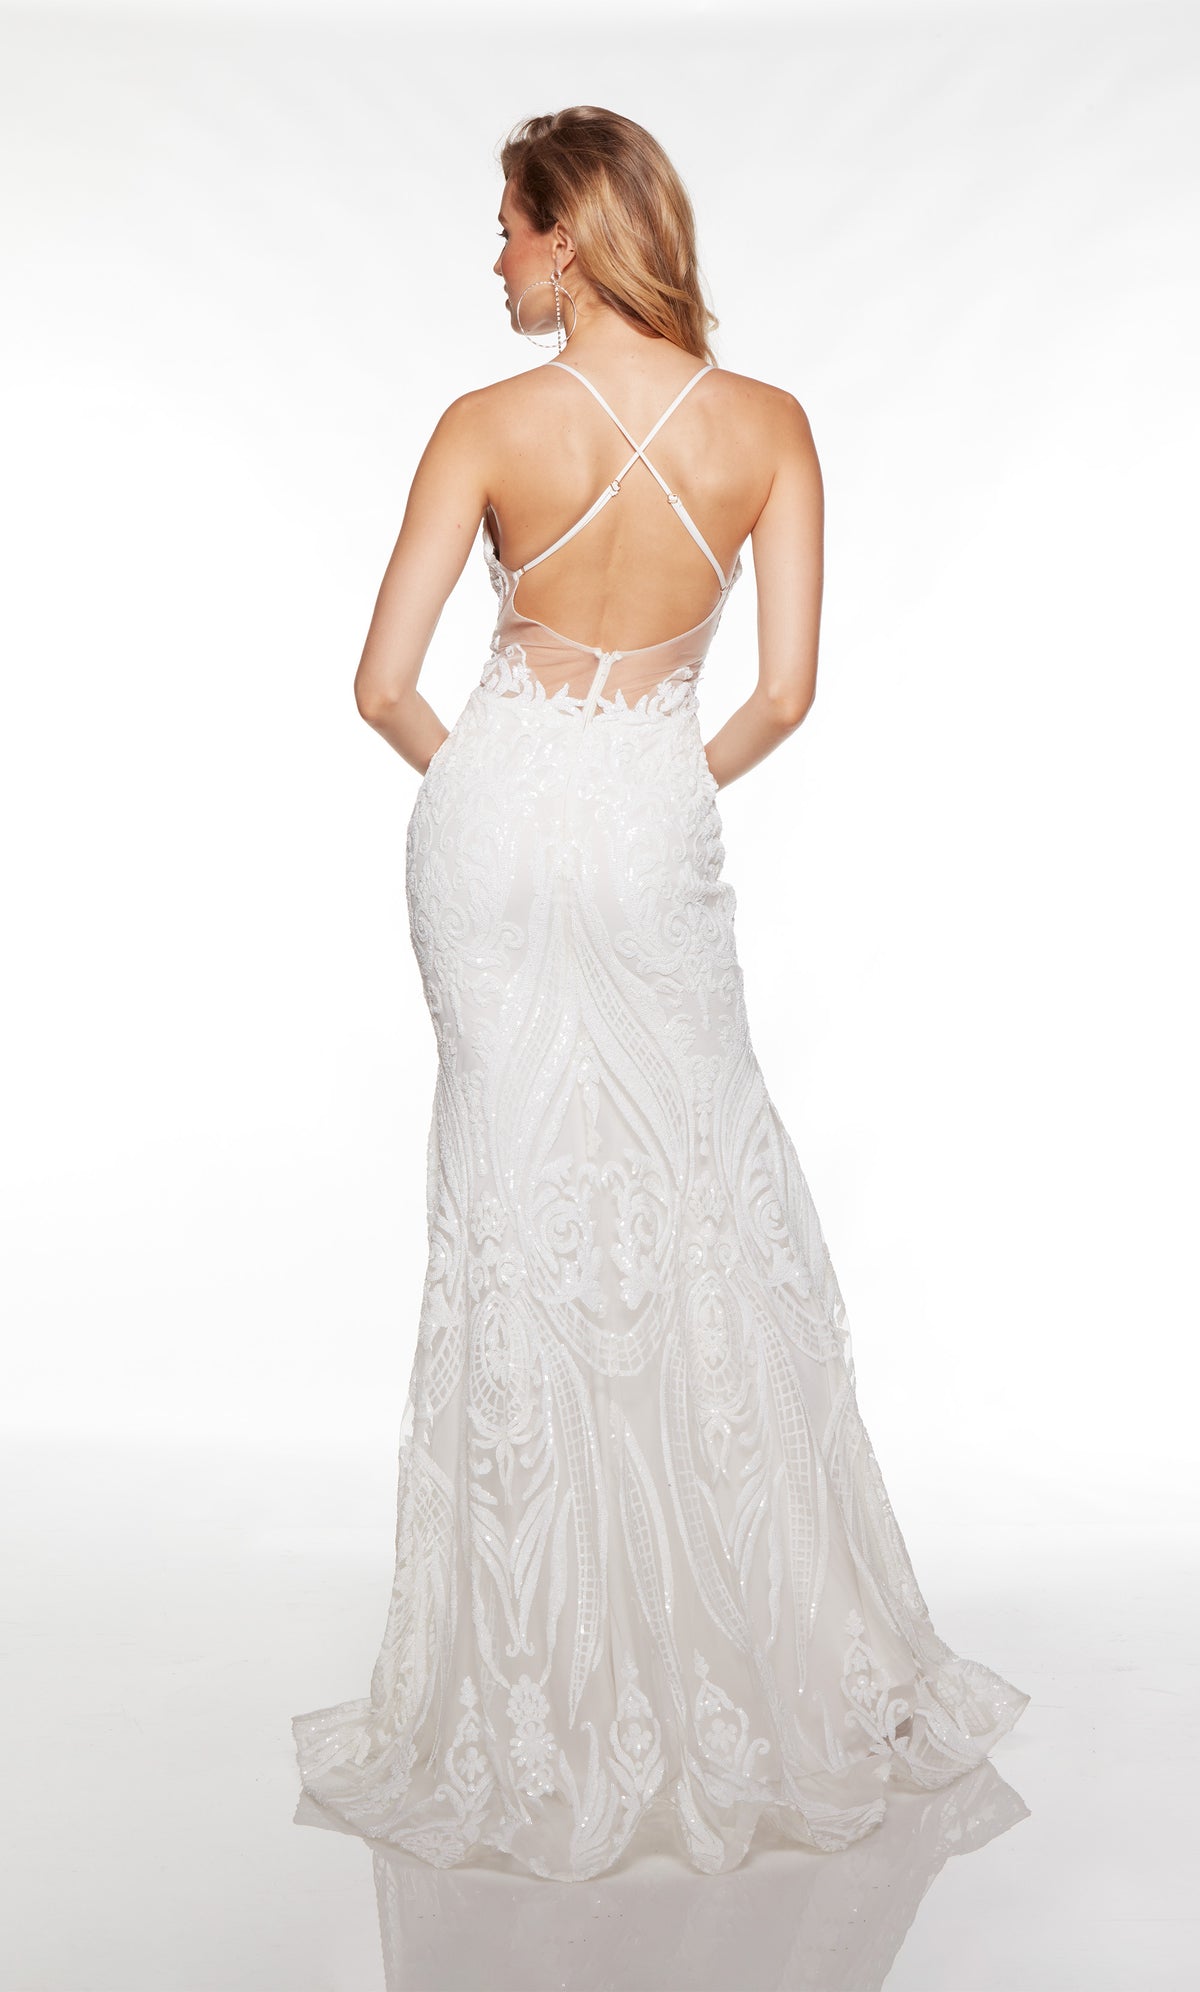 Sexy white prom dress with a crisscross back and slight train.